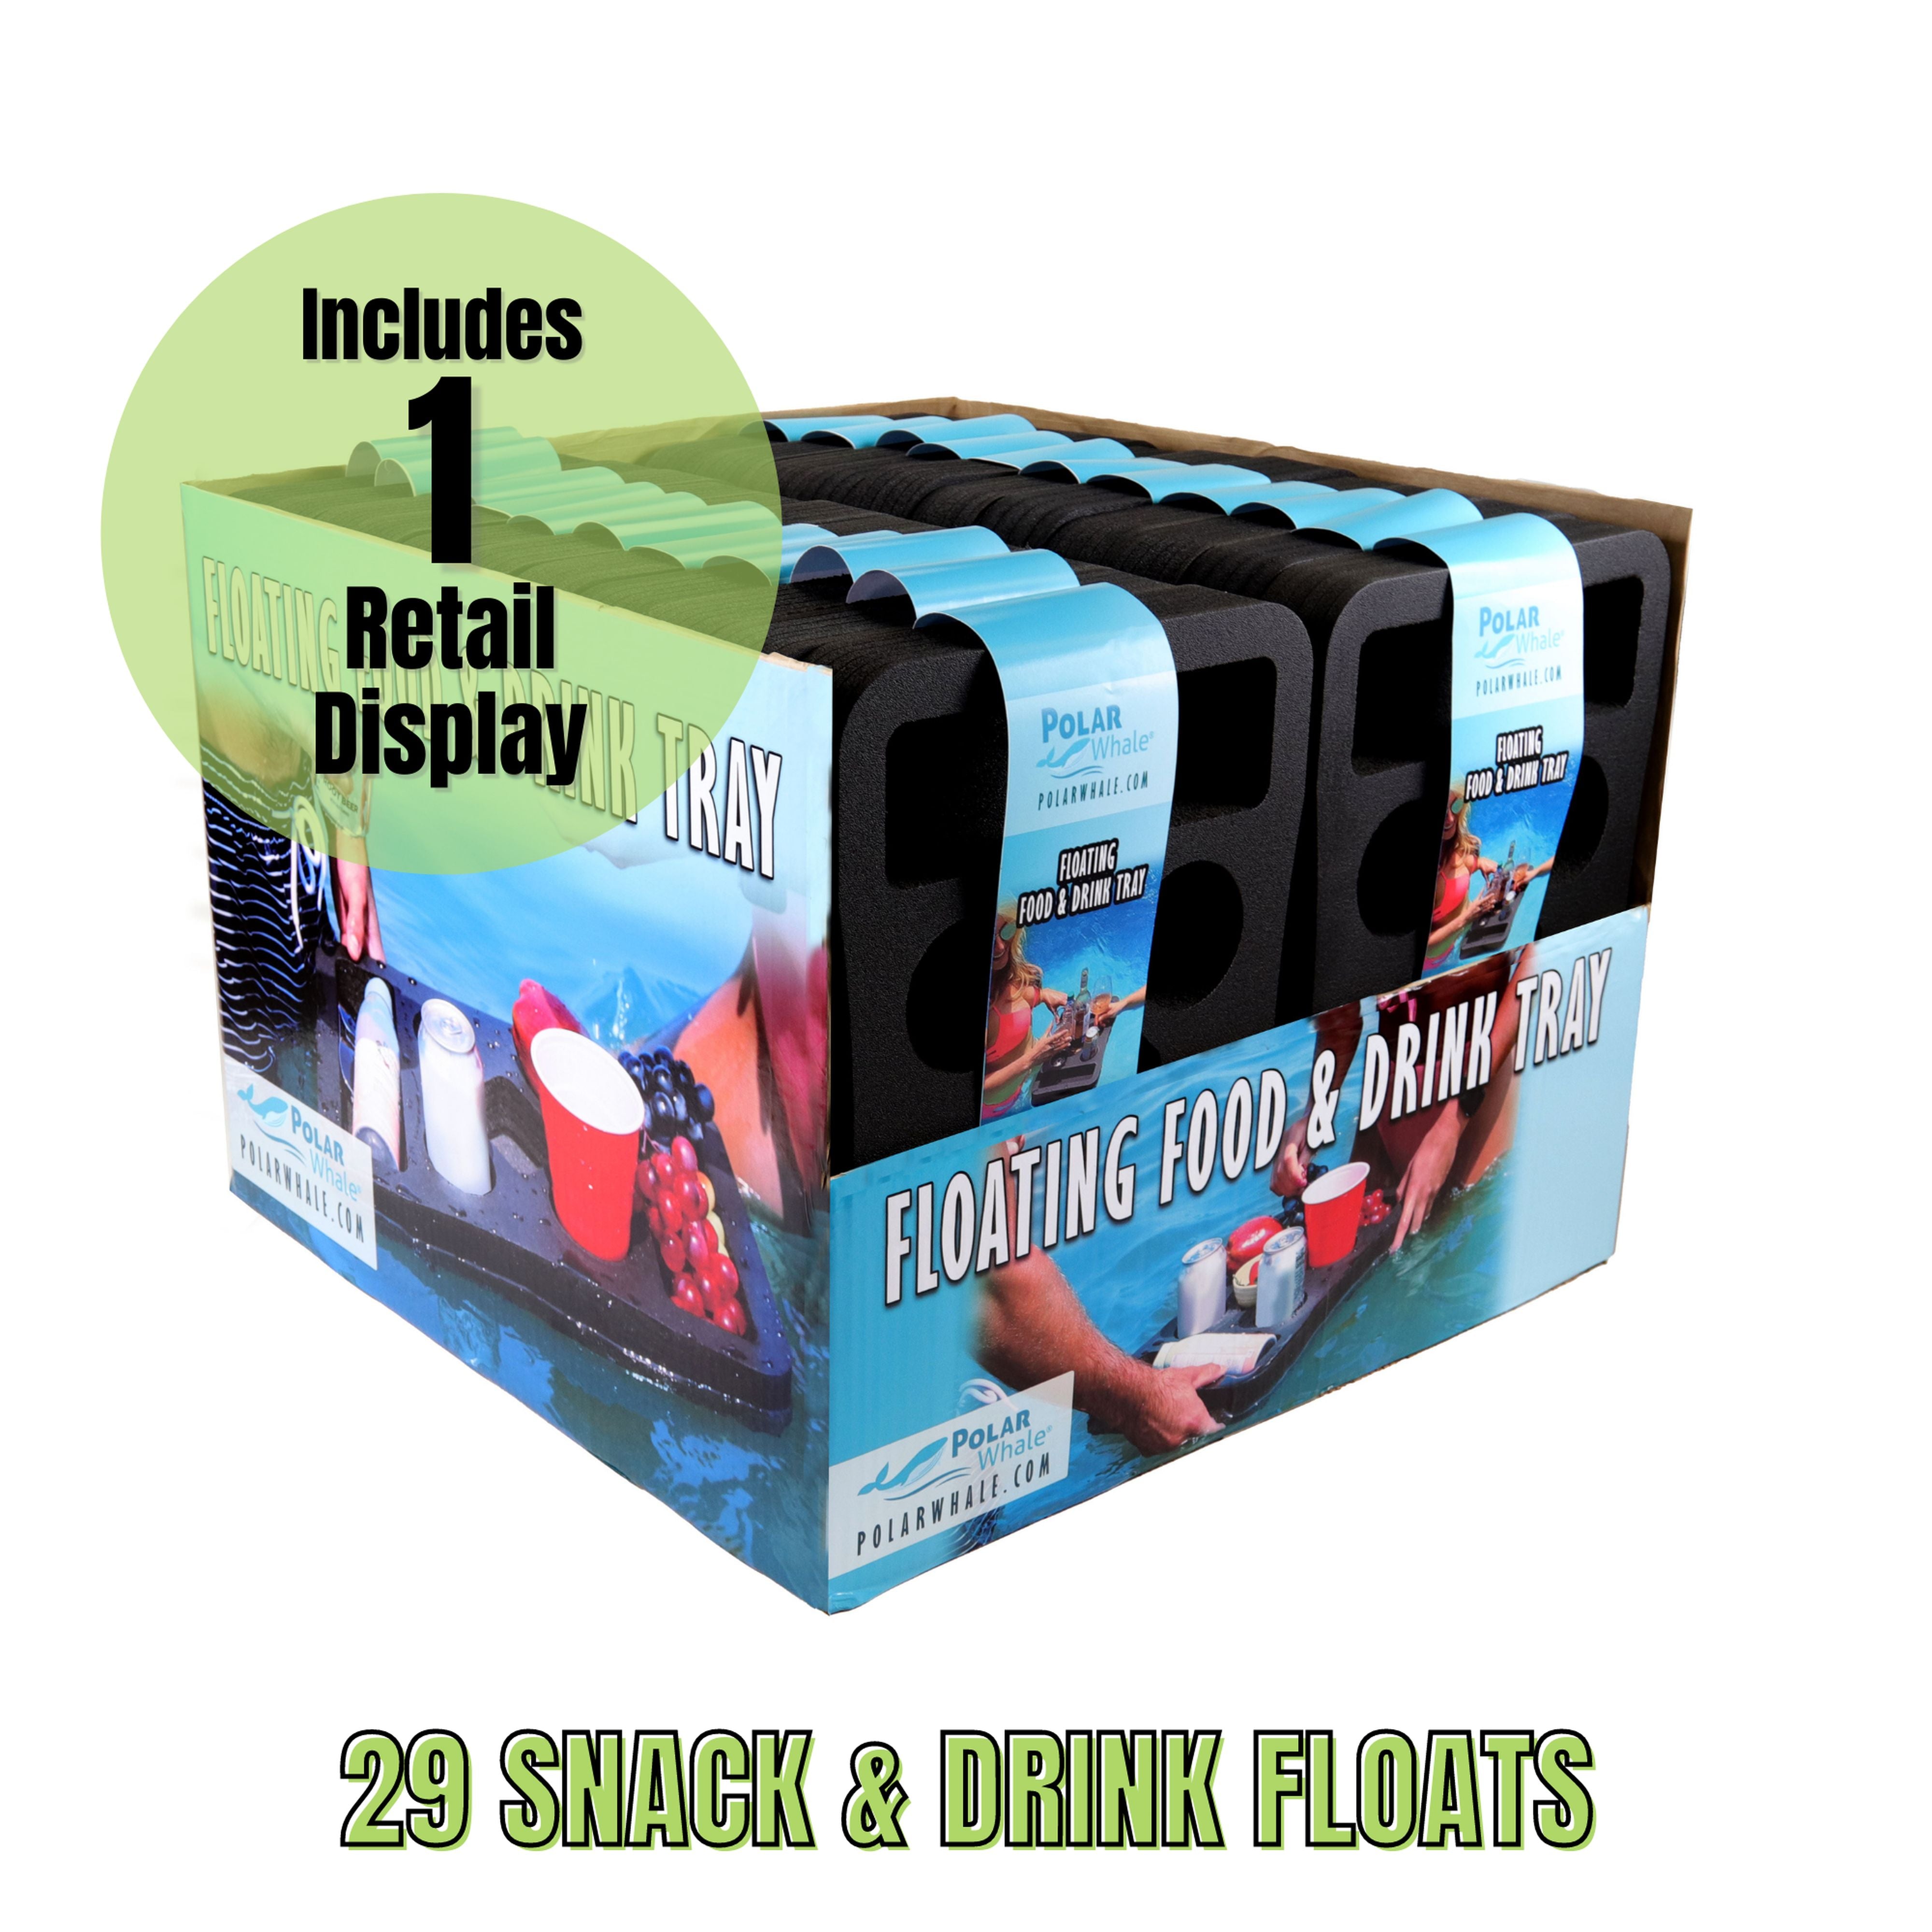 Floating Refreshment Table 17.5" x 11.5" - Set of 29 - Retail Display Packaging